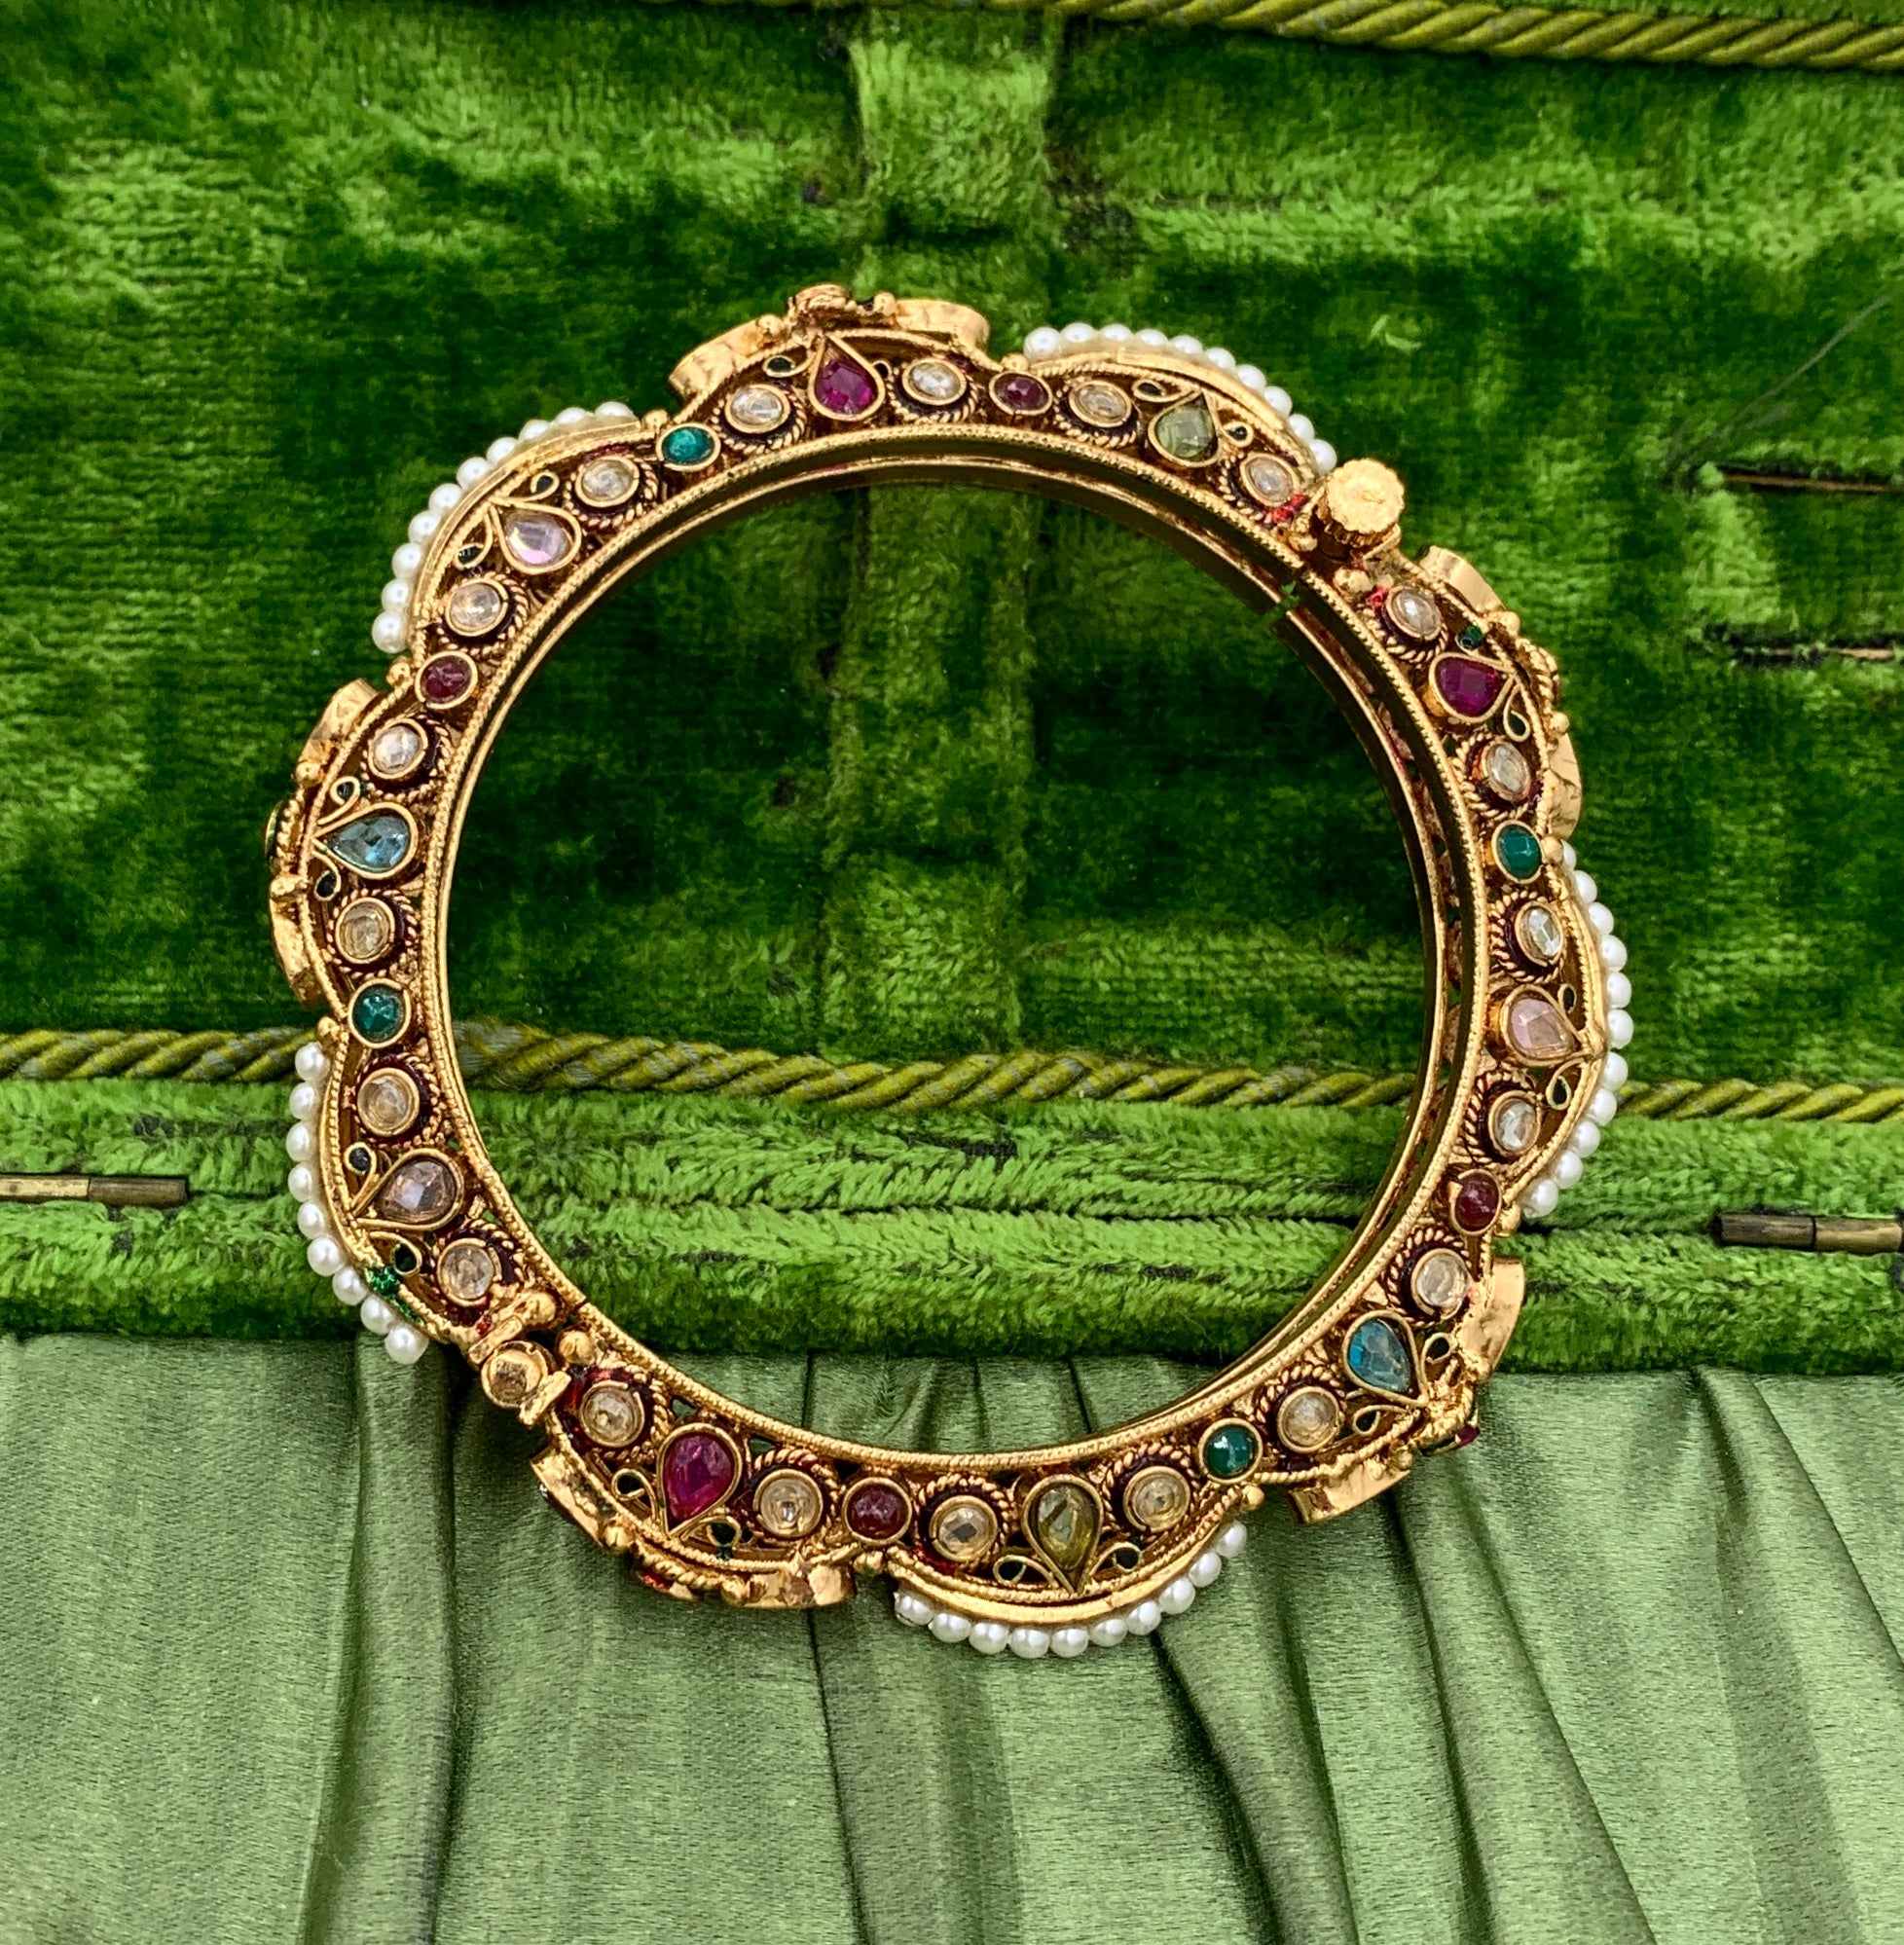 This is a wonderful antique India Mughal Jeweled Bangle Bracelet with gorgeous Ruby, Emerald, Peridot and Topaz gems with Pearls in a classic Mughal Rajasthan design.  The bracelet is Gold Gilt with 10 Karat Gold.  It is just exquisite.  The jewel